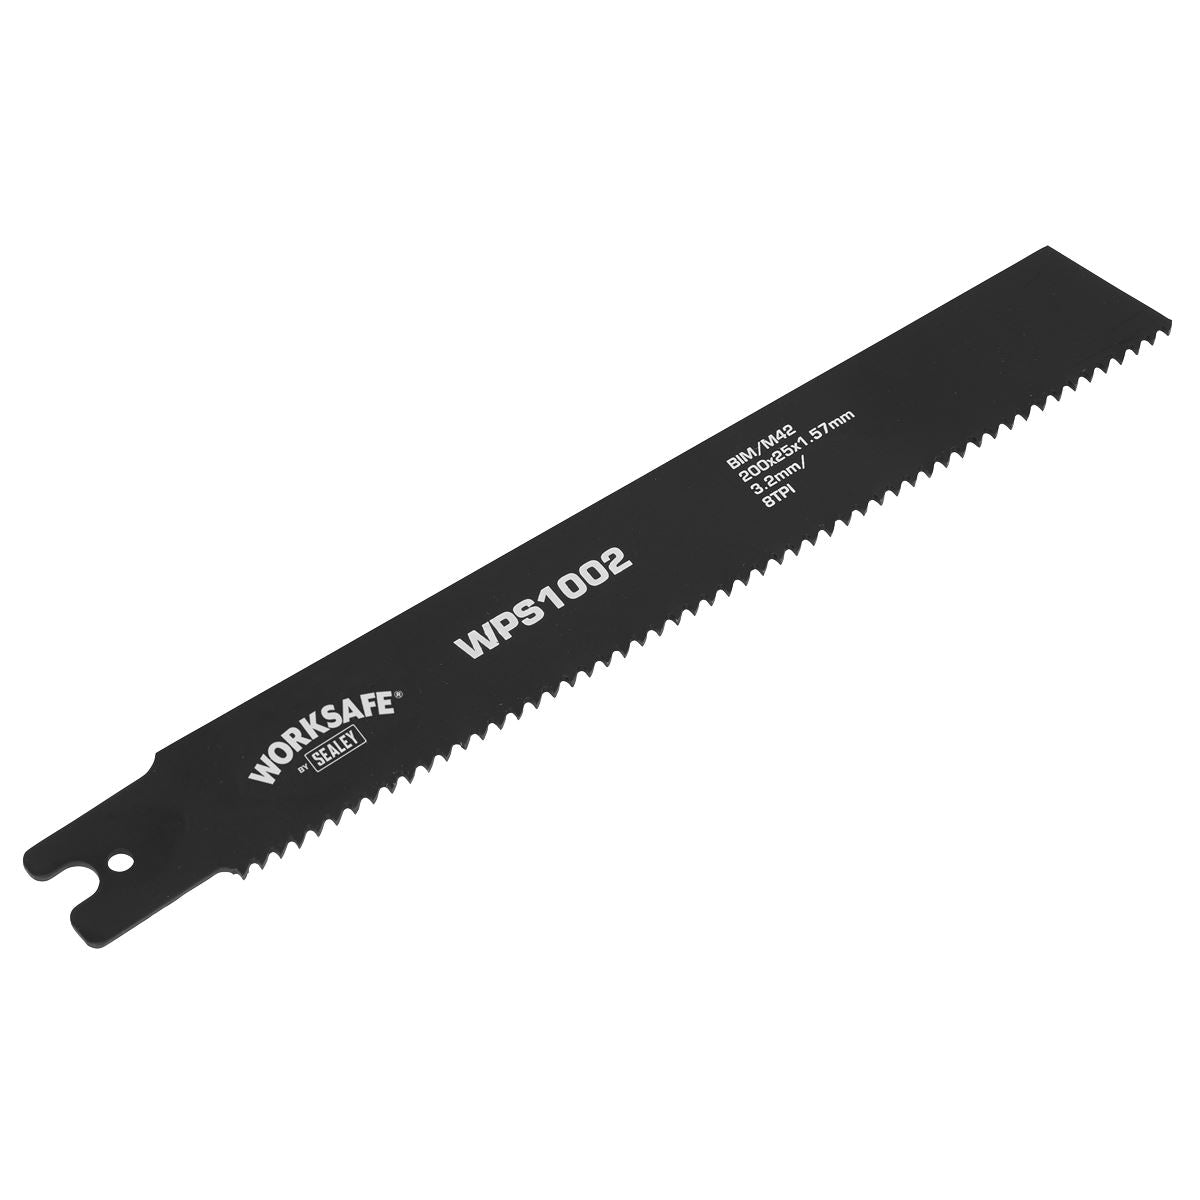 Worksafe by Sealey Pipe Saw Blade 200 x 25 x 1.7mm 8tpi - Pack of 5